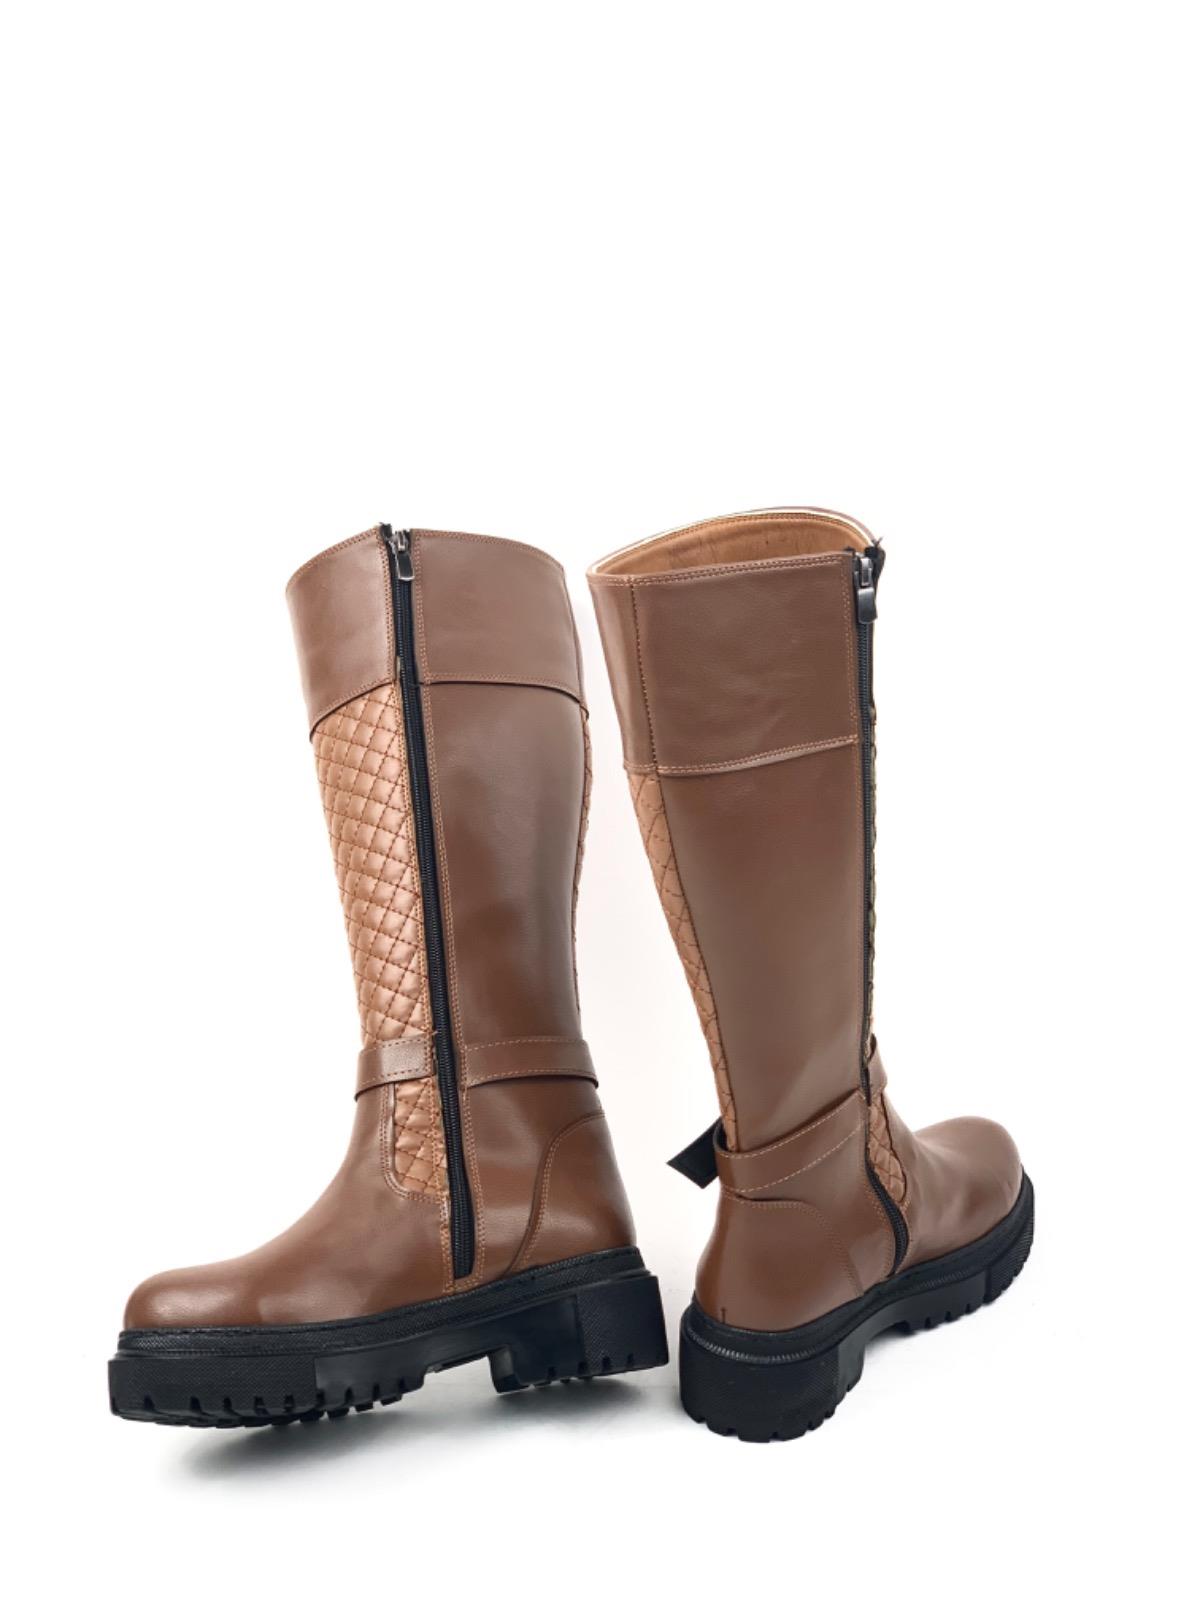 Women's Taba Jane Zippered Ready-made Thermo Sole Knee-high Patterned Buckle Boots - STREETMODE ™